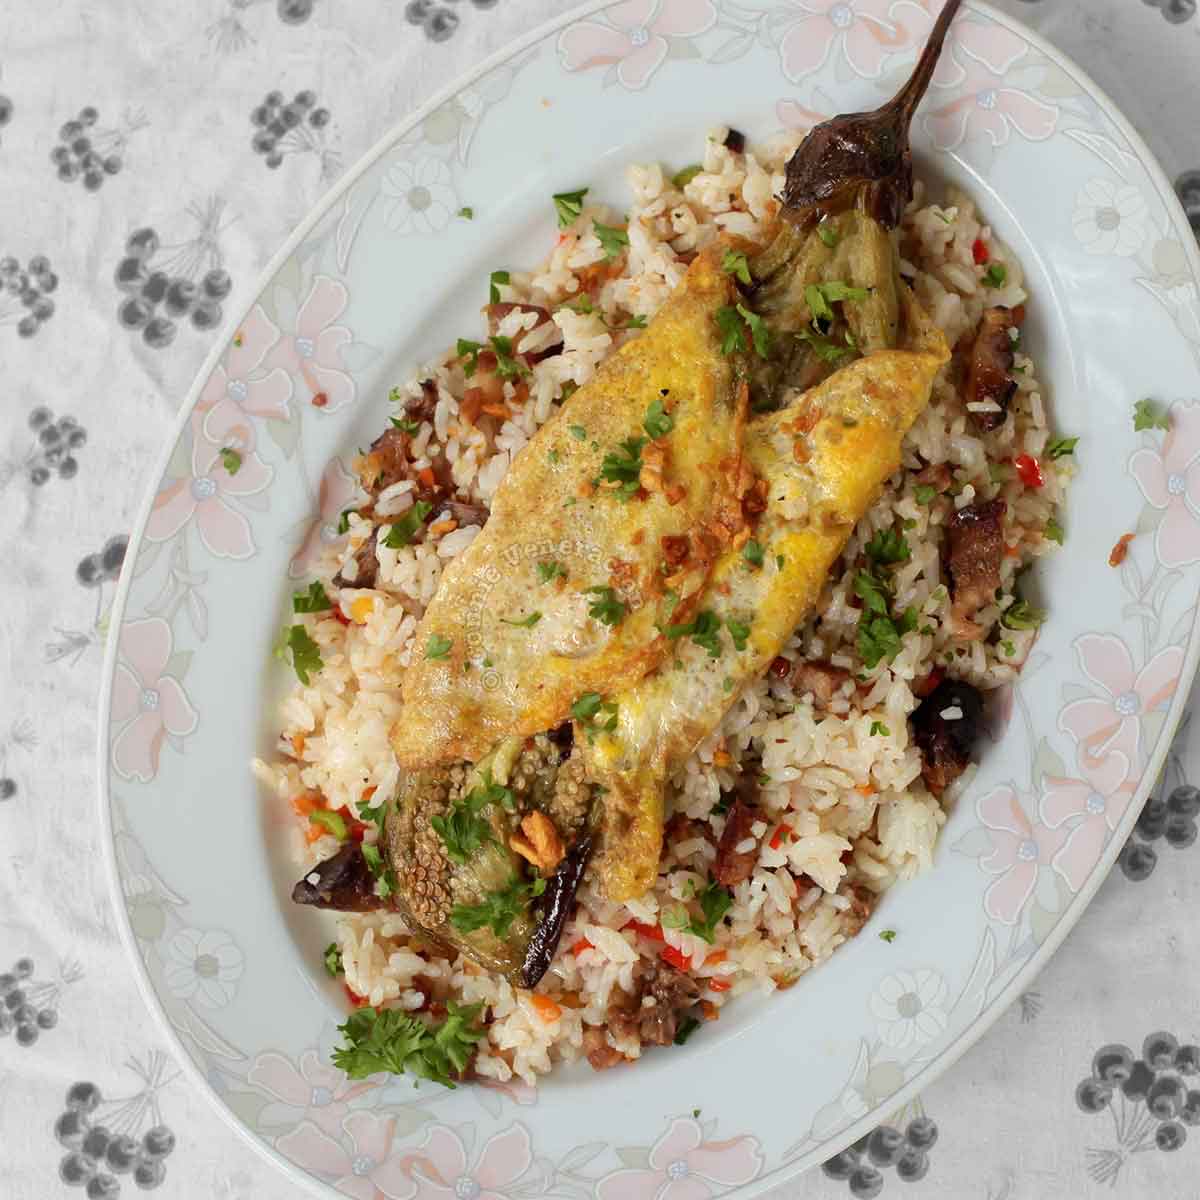 Eggplant omelette (tortang talong) on top of fried rice